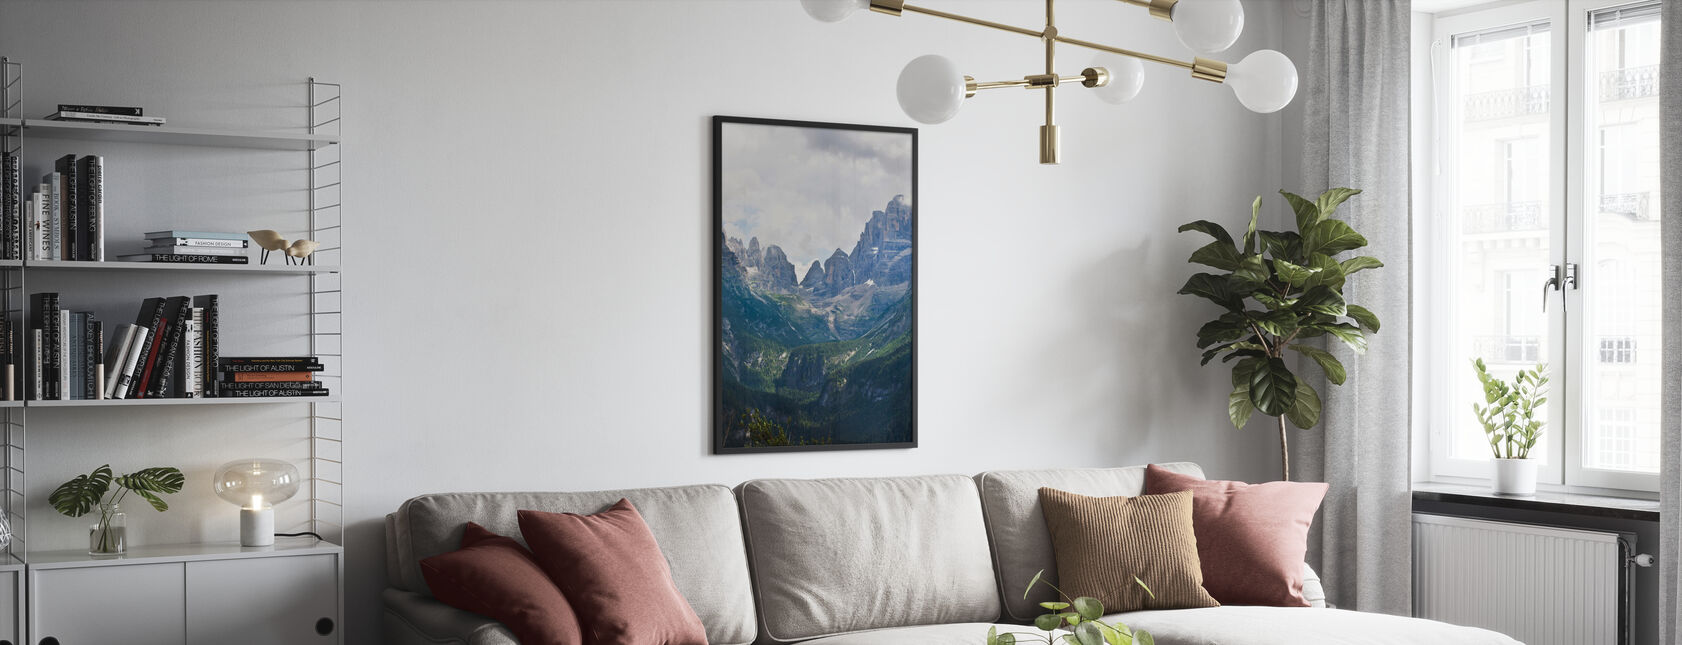 Madonna di Campiglio, Italy, Europe - Poster - Living Room